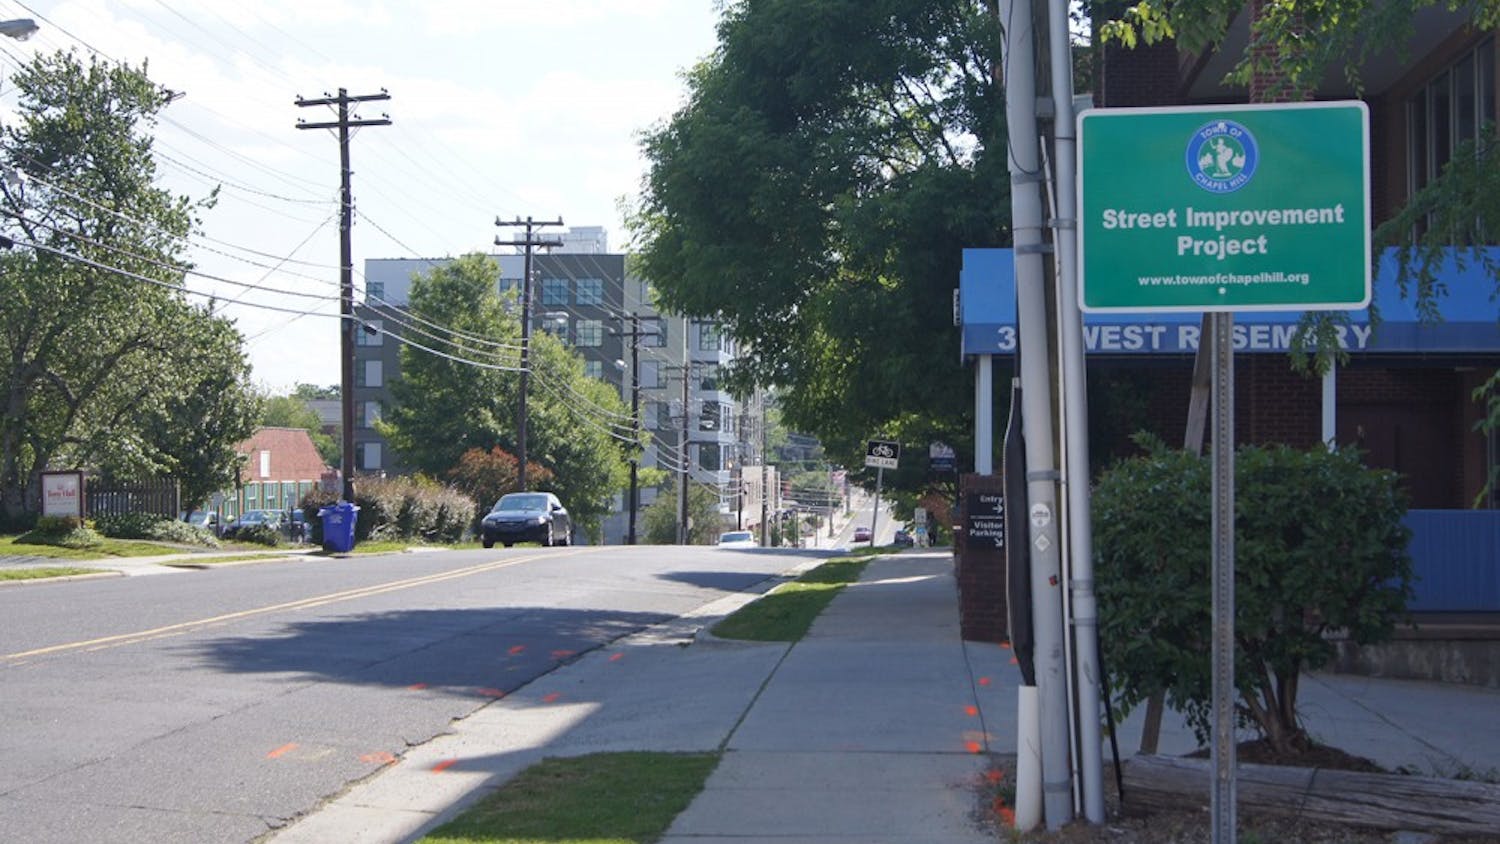 The Rosemary Street Public Improvement Project prepares for making a safer, nicer appearance. 